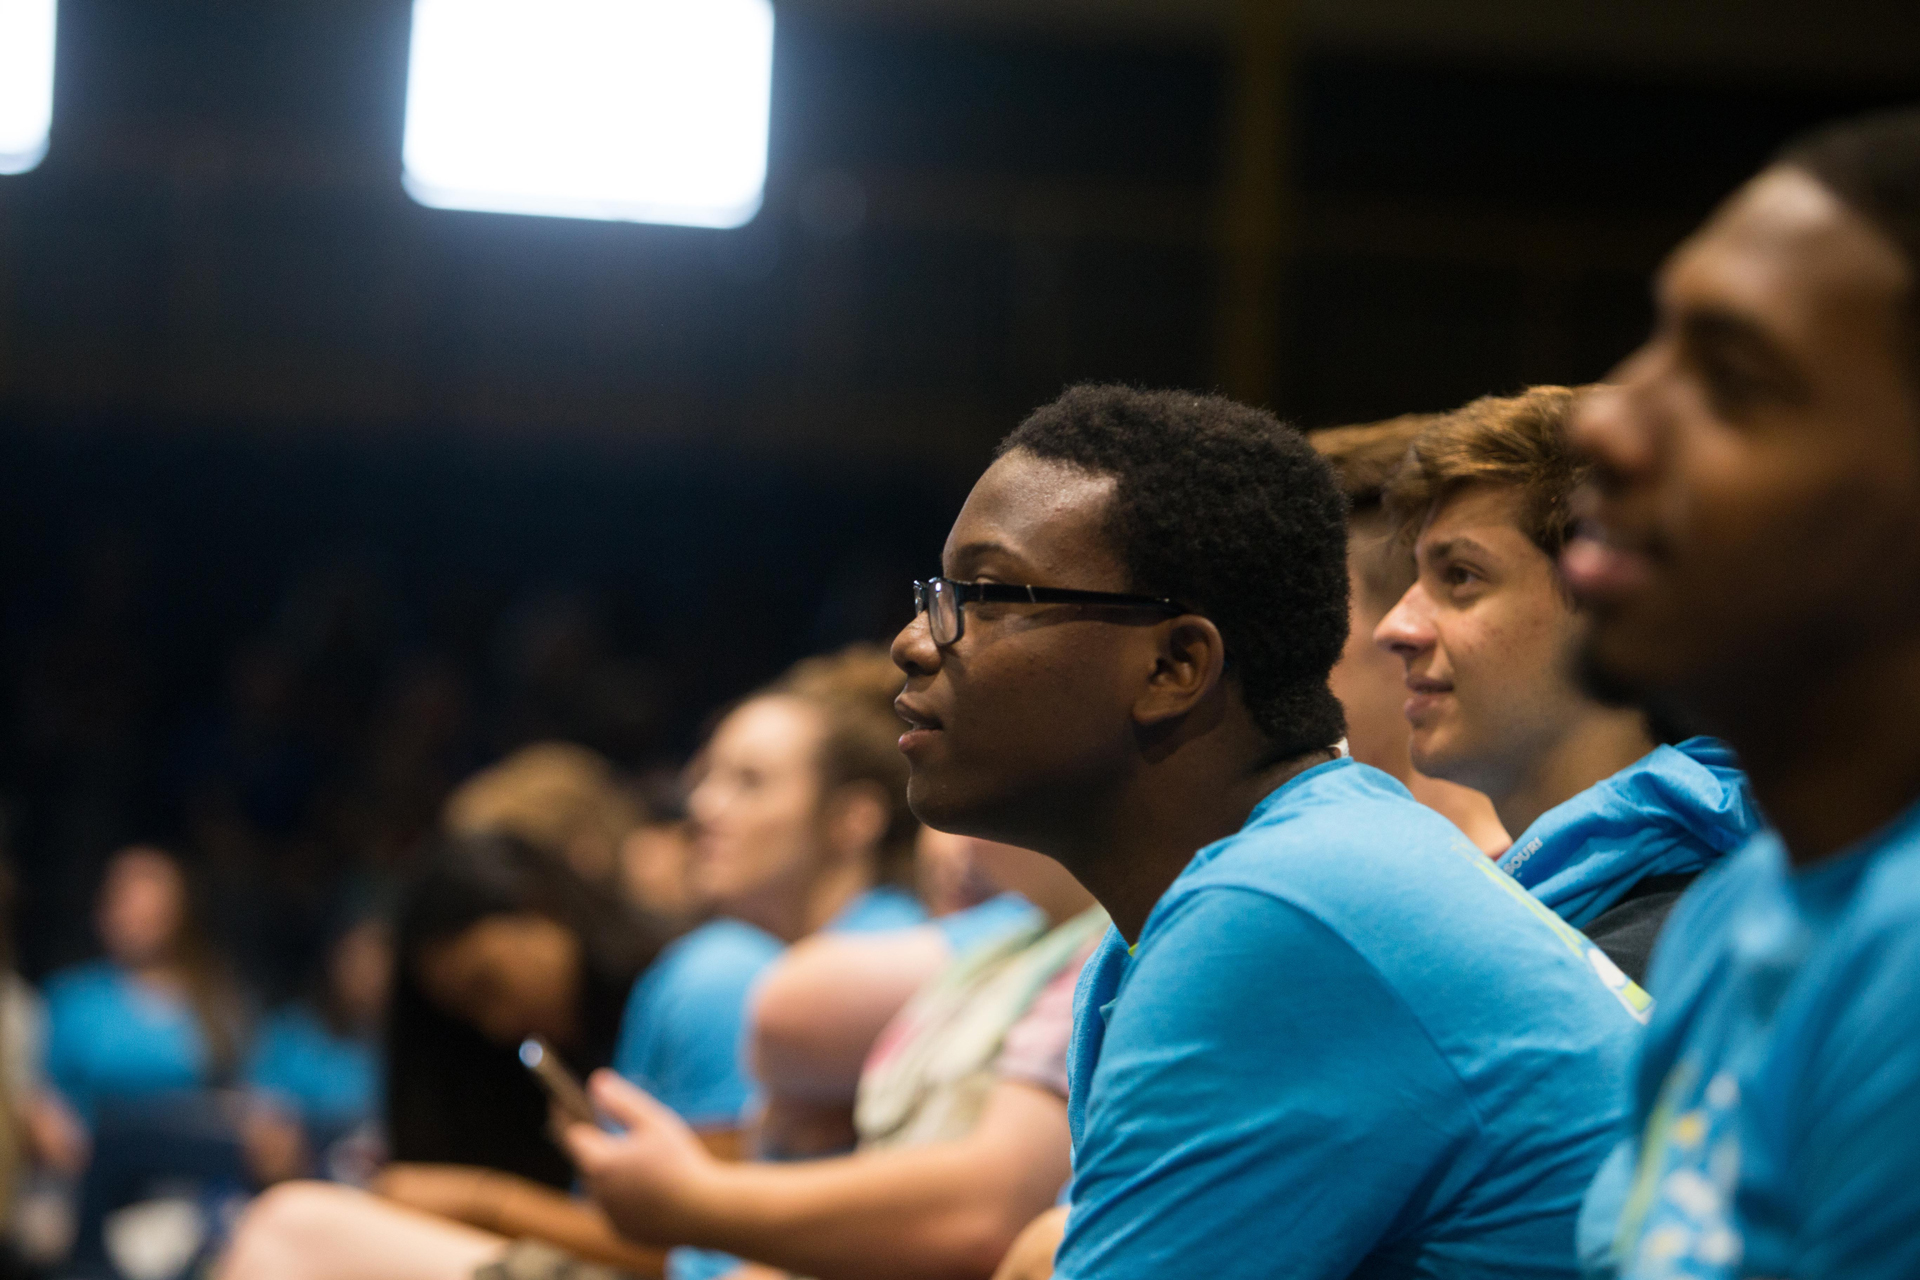 Black male student in glasses leans forward intently in row of students in blue shirts